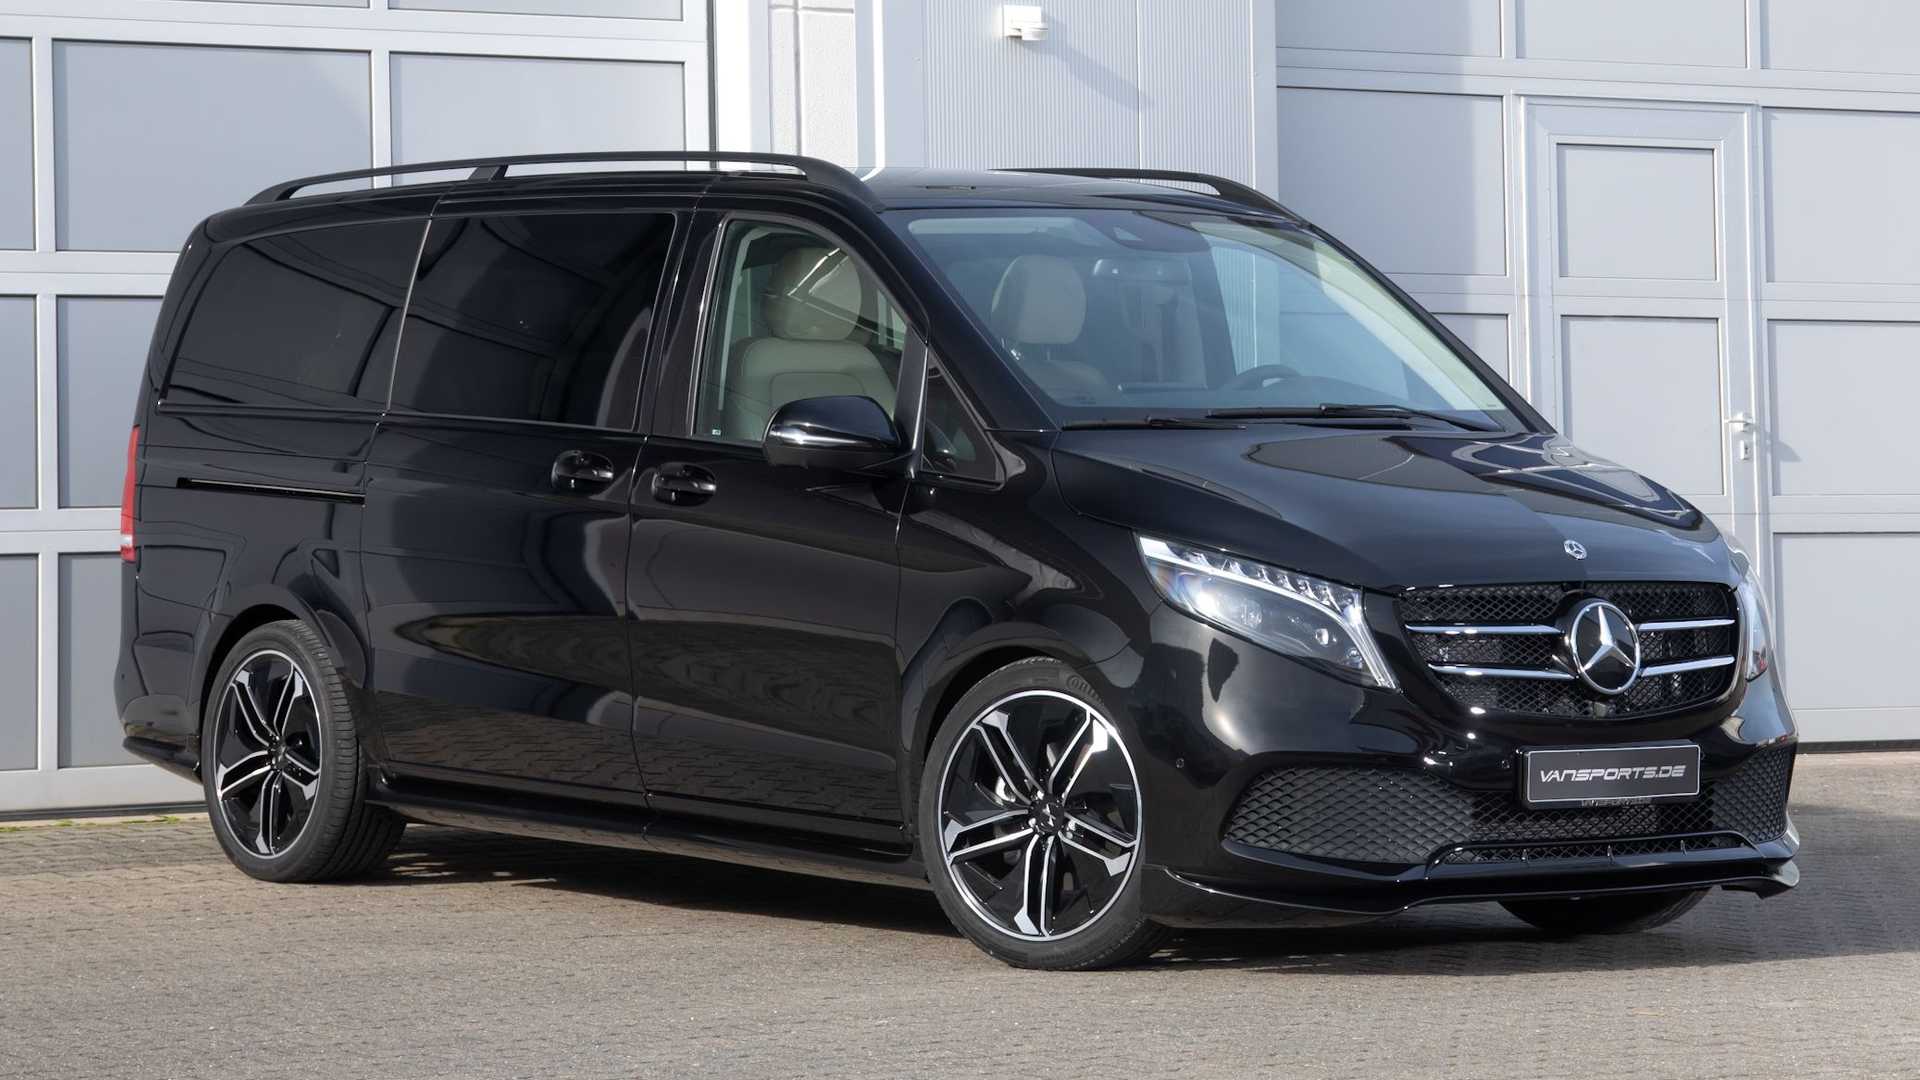 Mercedes V-Class From Vansports